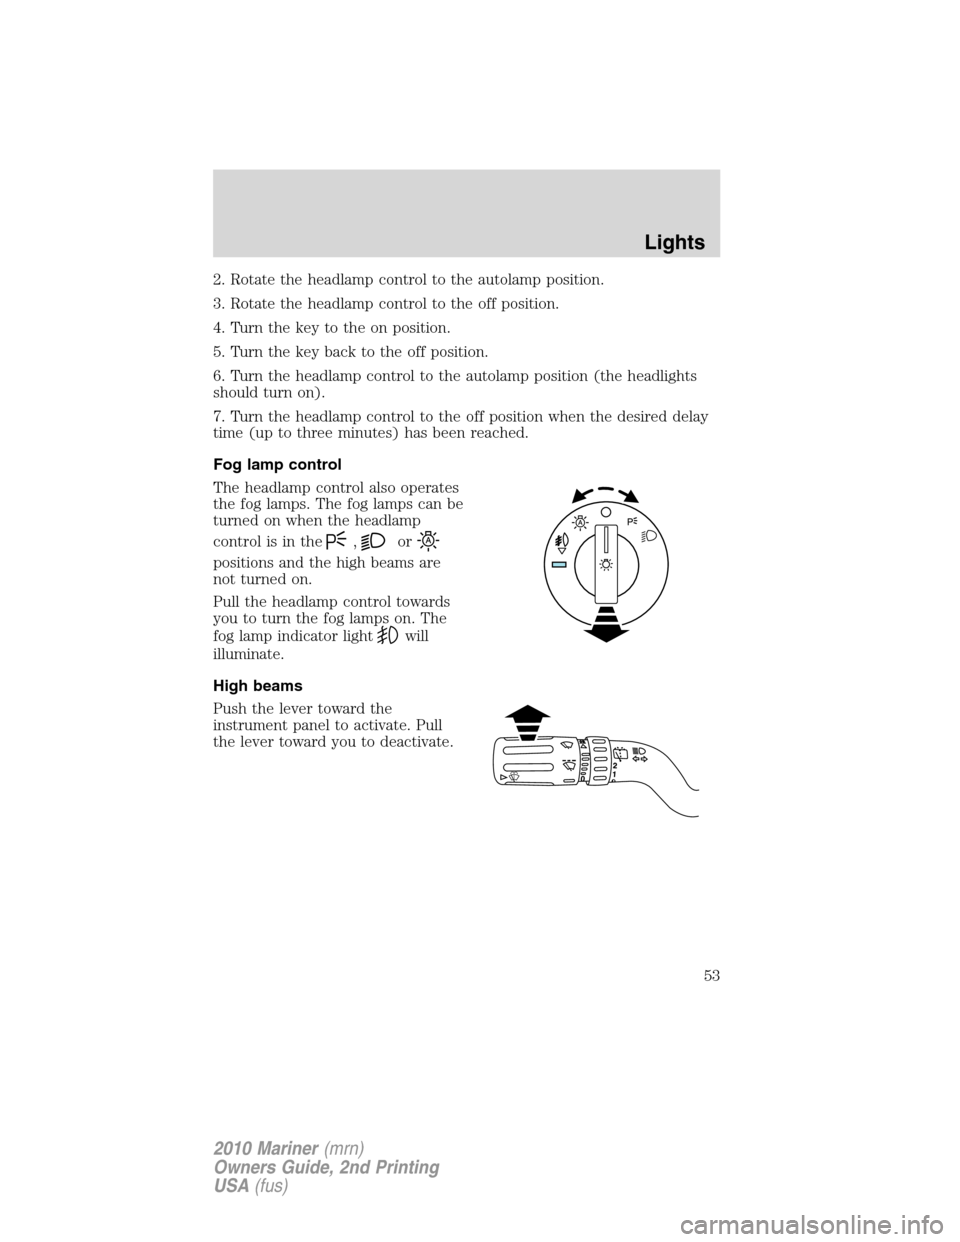 Mercury Mariner 2010  Owners Manuals 2. Rotate the headlamp control to the autolamp position.
3. Rotate the headlamp control to the off position.
4. Turn the key to the on position.
5. Turn the key back to the off position.
6. Turn the h